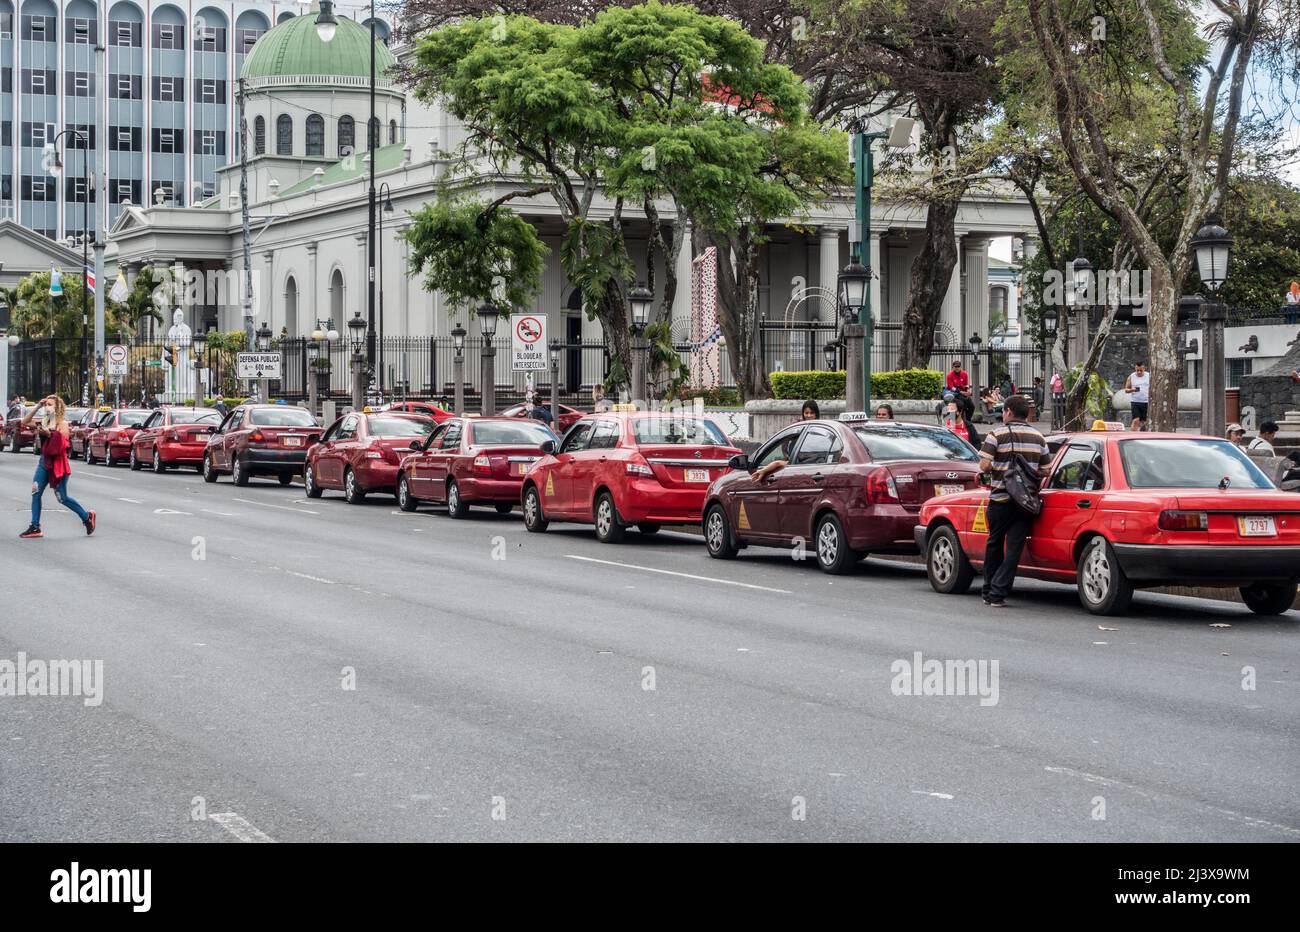 Line of red taxi cabs with Catholic church in the background in San Jose, Costa Rica. Stock Photo